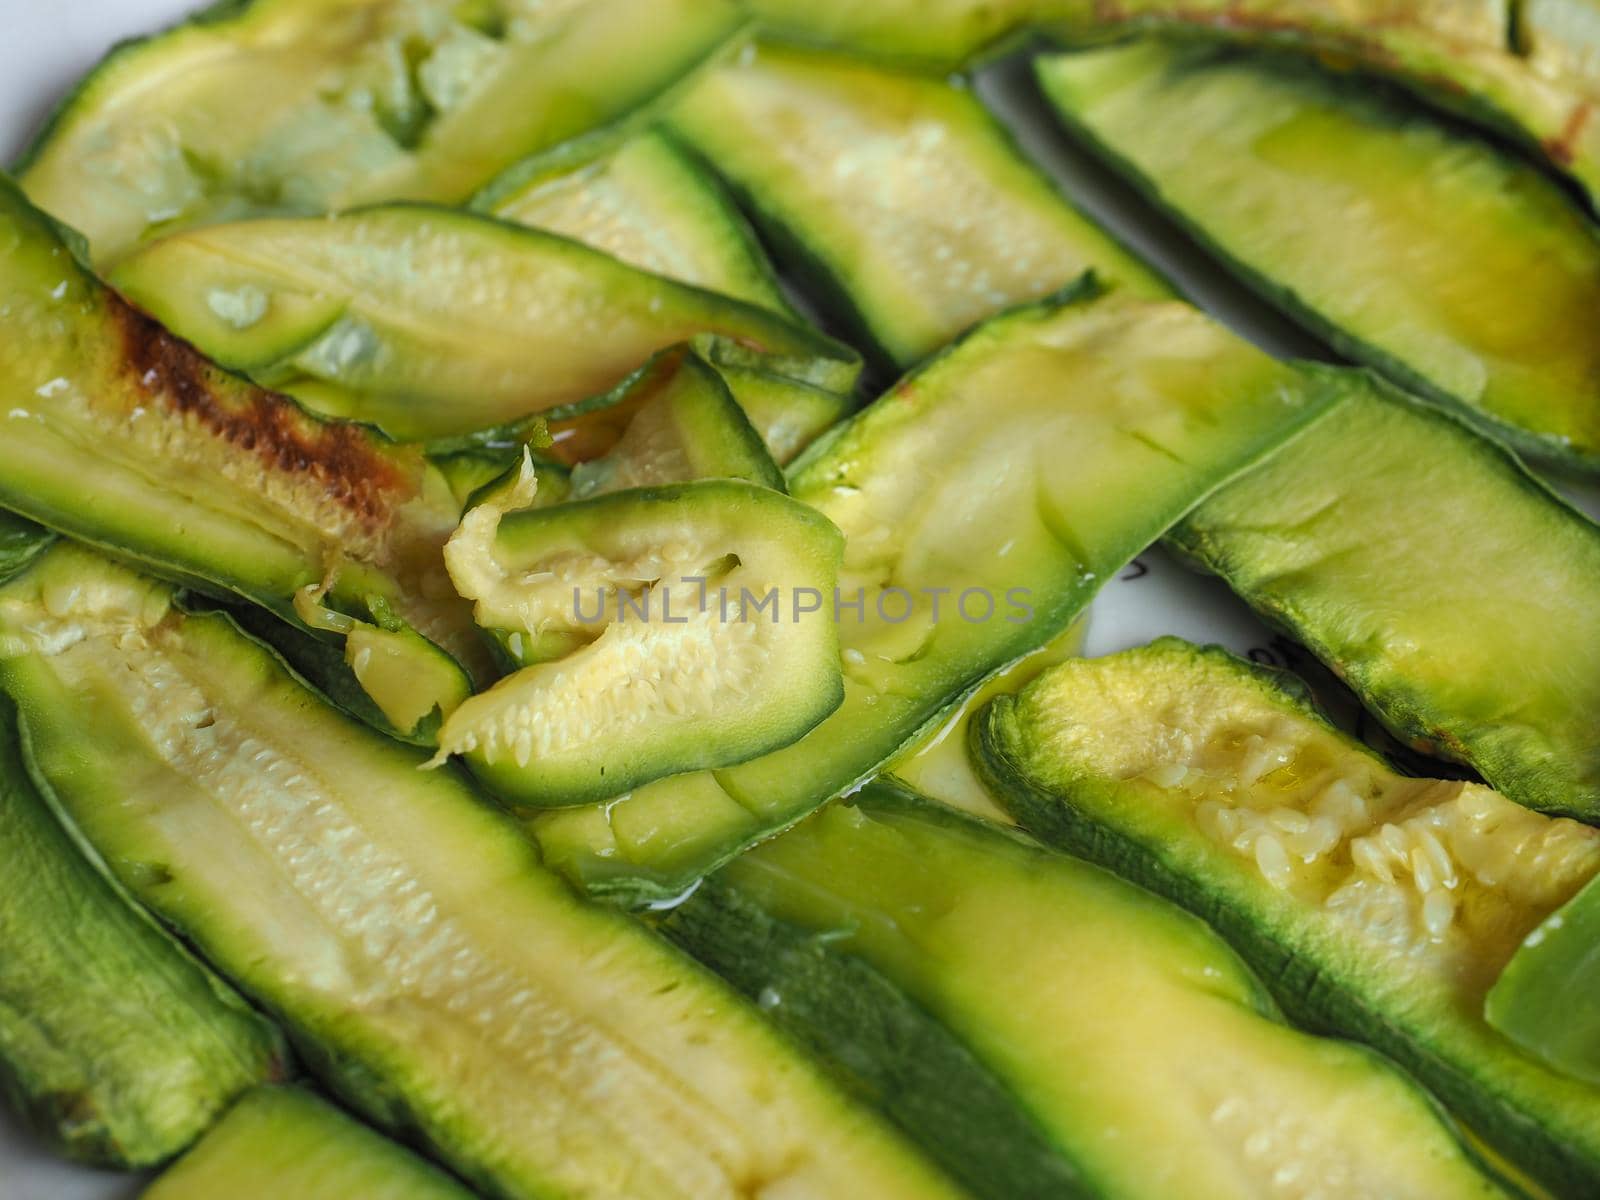 zucchini aka courgettes vegetables vegetarian food useful as a background